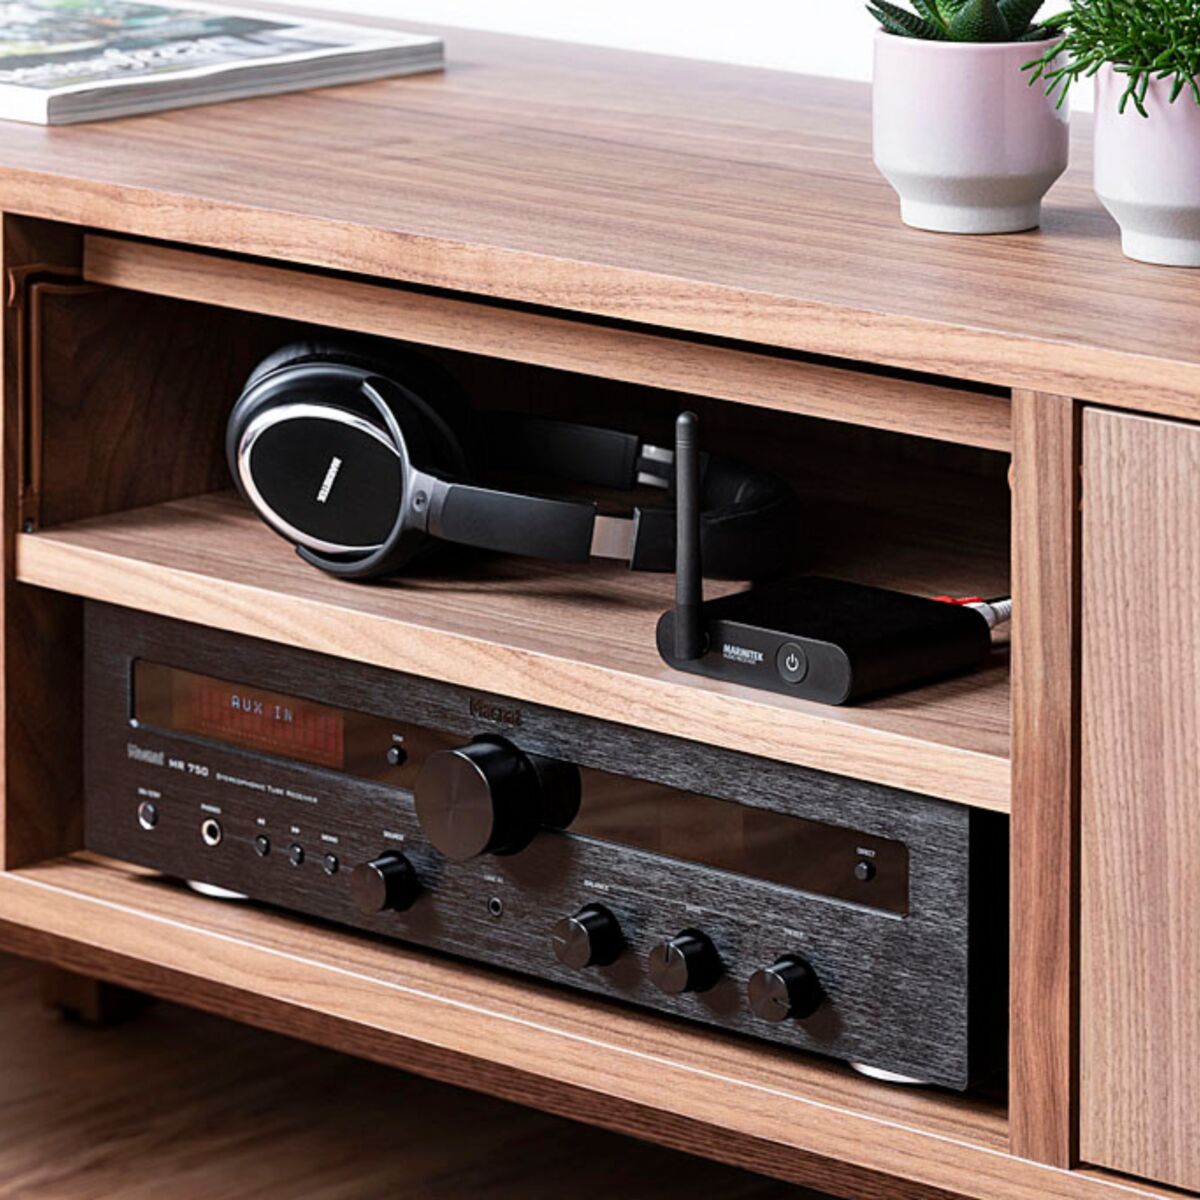 Audio Anywhere 630 - Audio Transmitter - Audio Receiver in a Cabinet with a connected AV Receiver | Marmitek